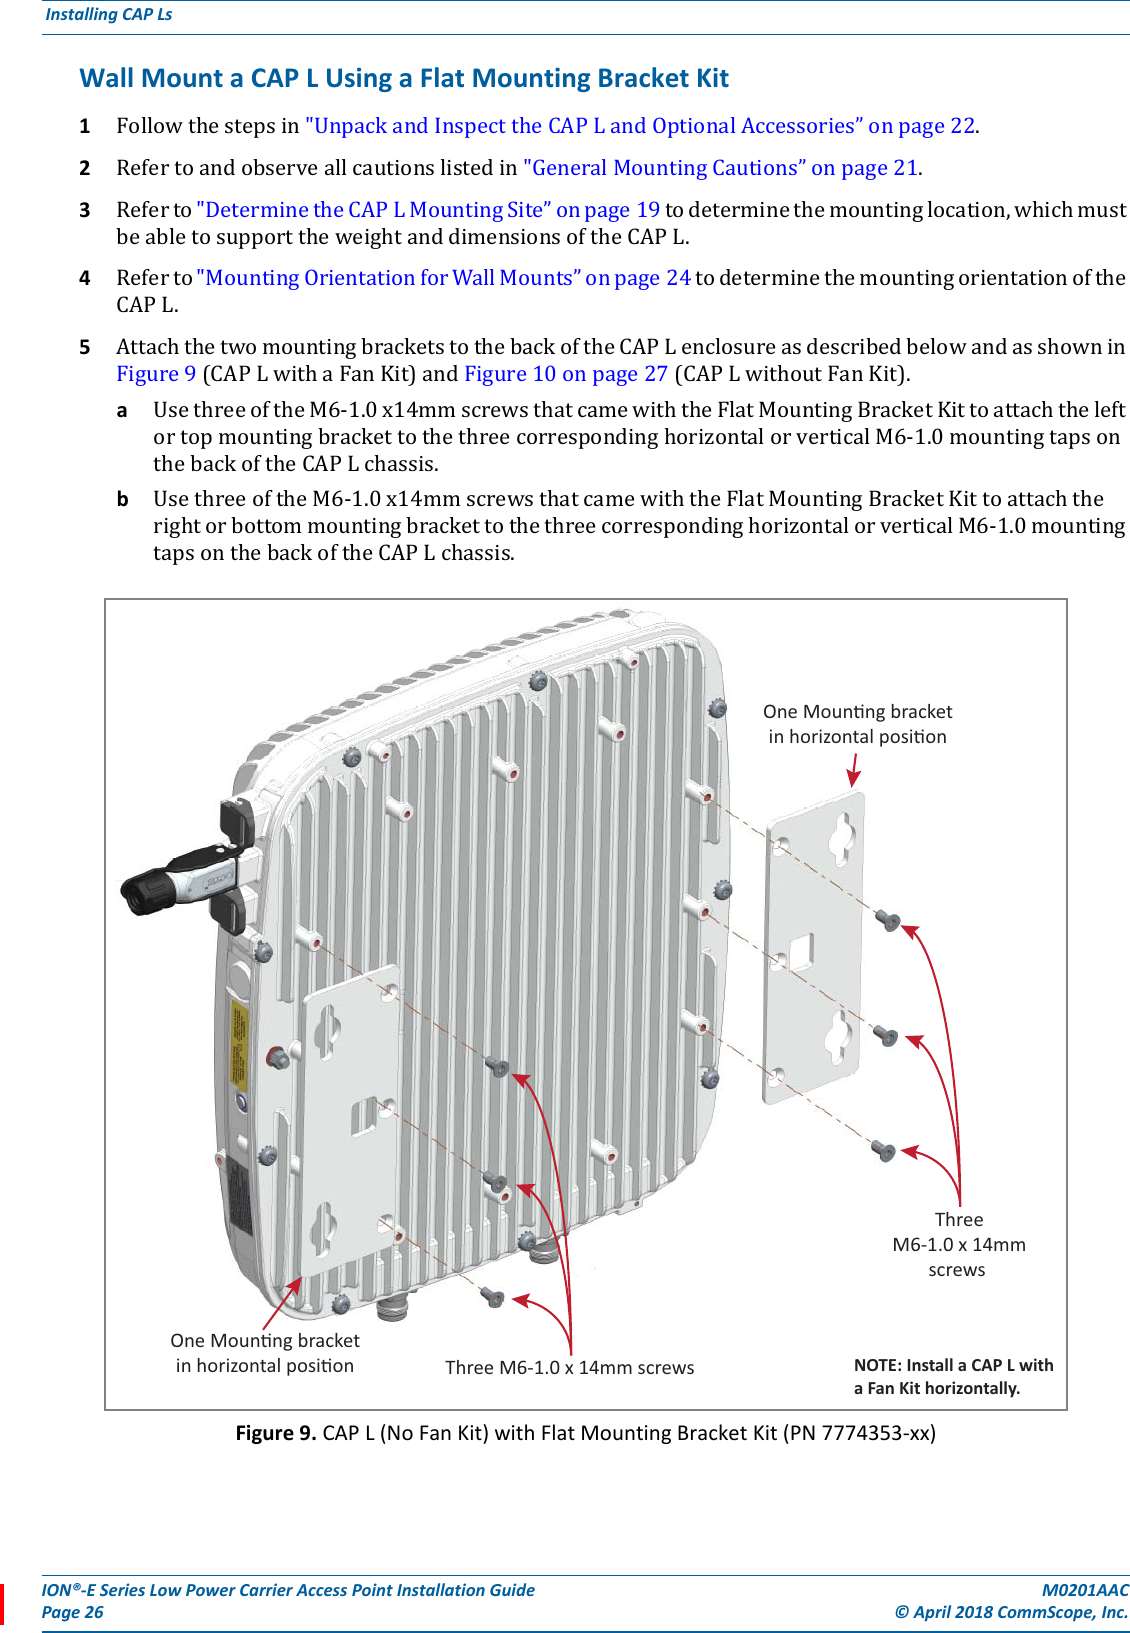 ION®-E Series Low Power Carrier Access Point Installation Guide M0201AACPage 26 © April 2018 CommScope, Inc. Installing CAP Ls  Wall Mount a CAP L Using a Flat Mounting Bracket Kit 1Followthestepsin&quot;UnpackandInspecttheCAPLandOptionalAccessories”onpage22.2Refertoandobserveallcautionslistedin&quot;GeneralMountingCautions”onpage21.3Referto&quot;DeterminetheCAPLMountingSite”onpage19todeterminethemountinglocation,whichmustbeabletosupporttheweightanddimensionsoftheCAPL.4Referto&quot;MountingOrientationforWallMounts”onpage24todeterminethemountingorientationoftheCAPL.5AttachthetwomountingbracketstothebackoftheCAPLenclosureasdescribedbelowandasshowninFigure9(CAPLwithaFanKit)andFigure10onpage27(CAPLwithoutFanKit).aUsethreeoftheM6-1.0x14mmscrewsthatcamewiththeFlatMountingBracketKittoattachtheleftortopmountingbrackettothethreecorrespondinghorizontalorverticalM6-1.0mountingtapsonthebackoftheCAPLchassis.bUsethreeoftheM6-1.0x14mmscrewsthatcamewiththeFlatMountingBracketKittoattachtherightorbottommountingbrackettothethreecorrespondinghorizontalorverticalM6-1.0mountingtapsonthebackoftheCAPLchassis.Figure 9. CAP L (No Fan Kit) with Flat Mounting Bracket Kit (PN 7774353-xx)One Mounng bracketin horizontal posionThreeM6-1.0 x 14mmscrews One Mounng bracketin horizontal posion Three M6-1.0 x 14mm screws NOTE: Install a CAP L witha Fan Kit horizontally.